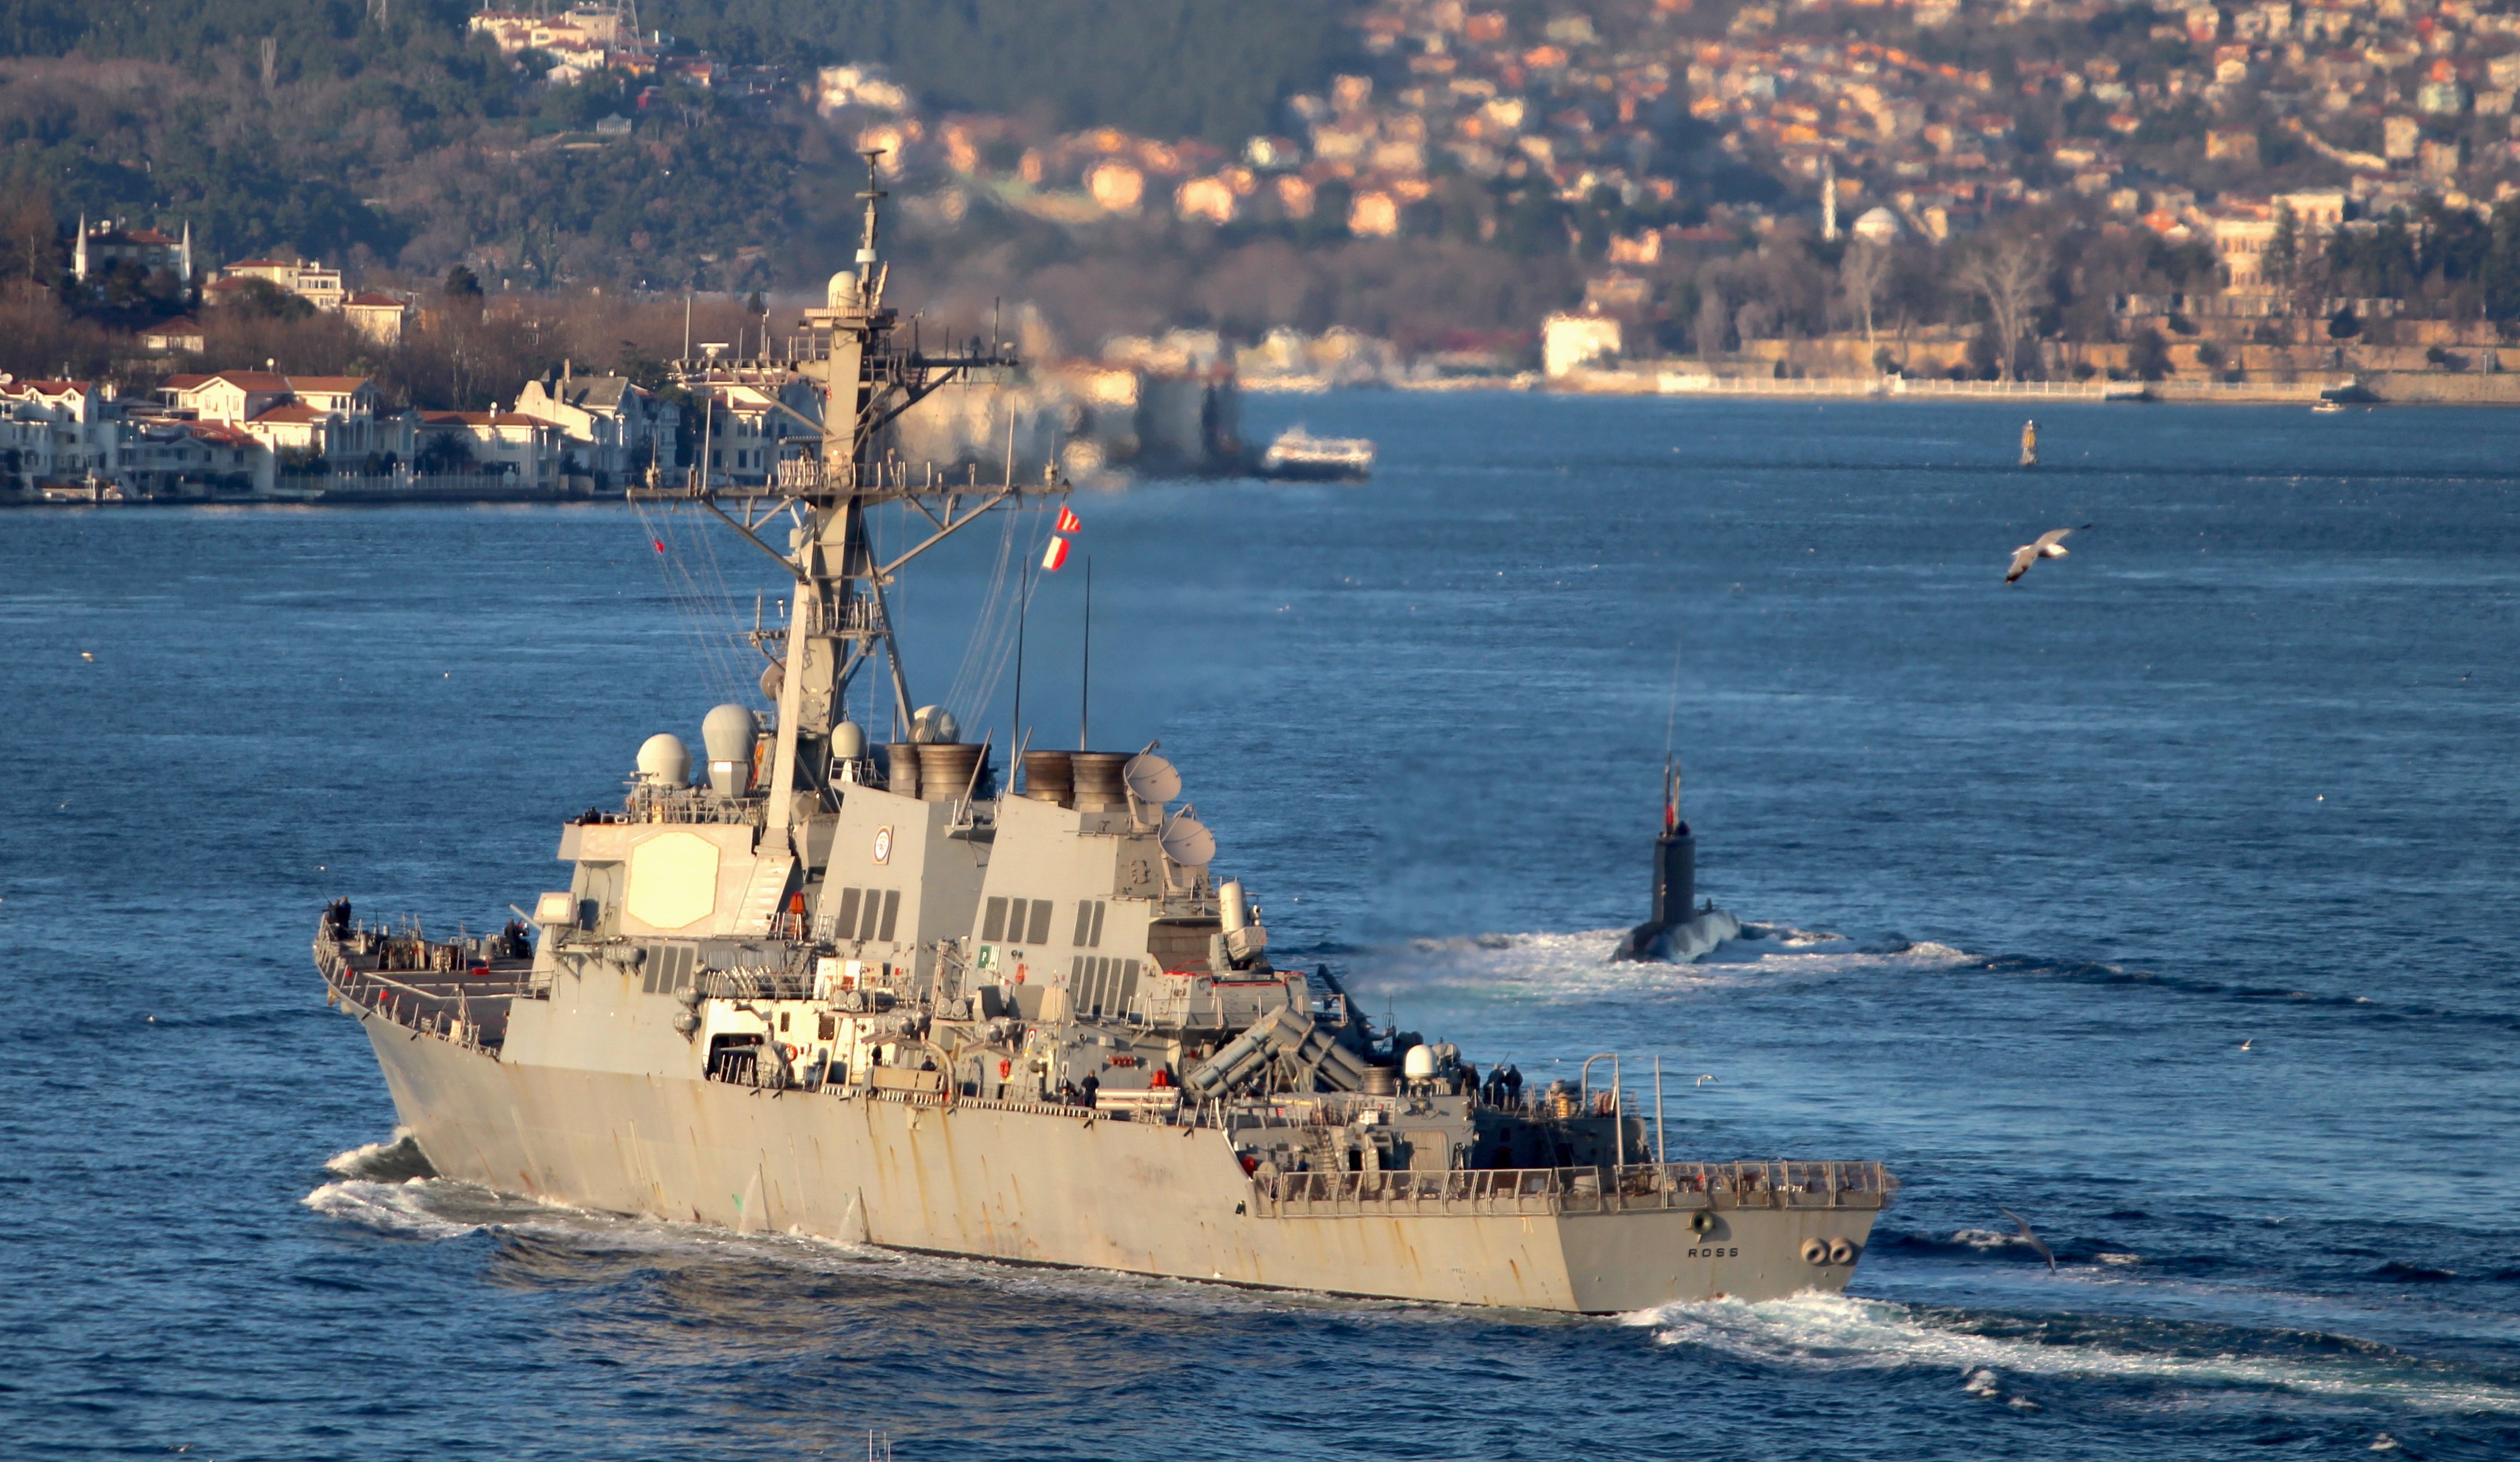 VIDEO: USS Ross Enters Black Sea, Movements Monitored by Russia - USNI News